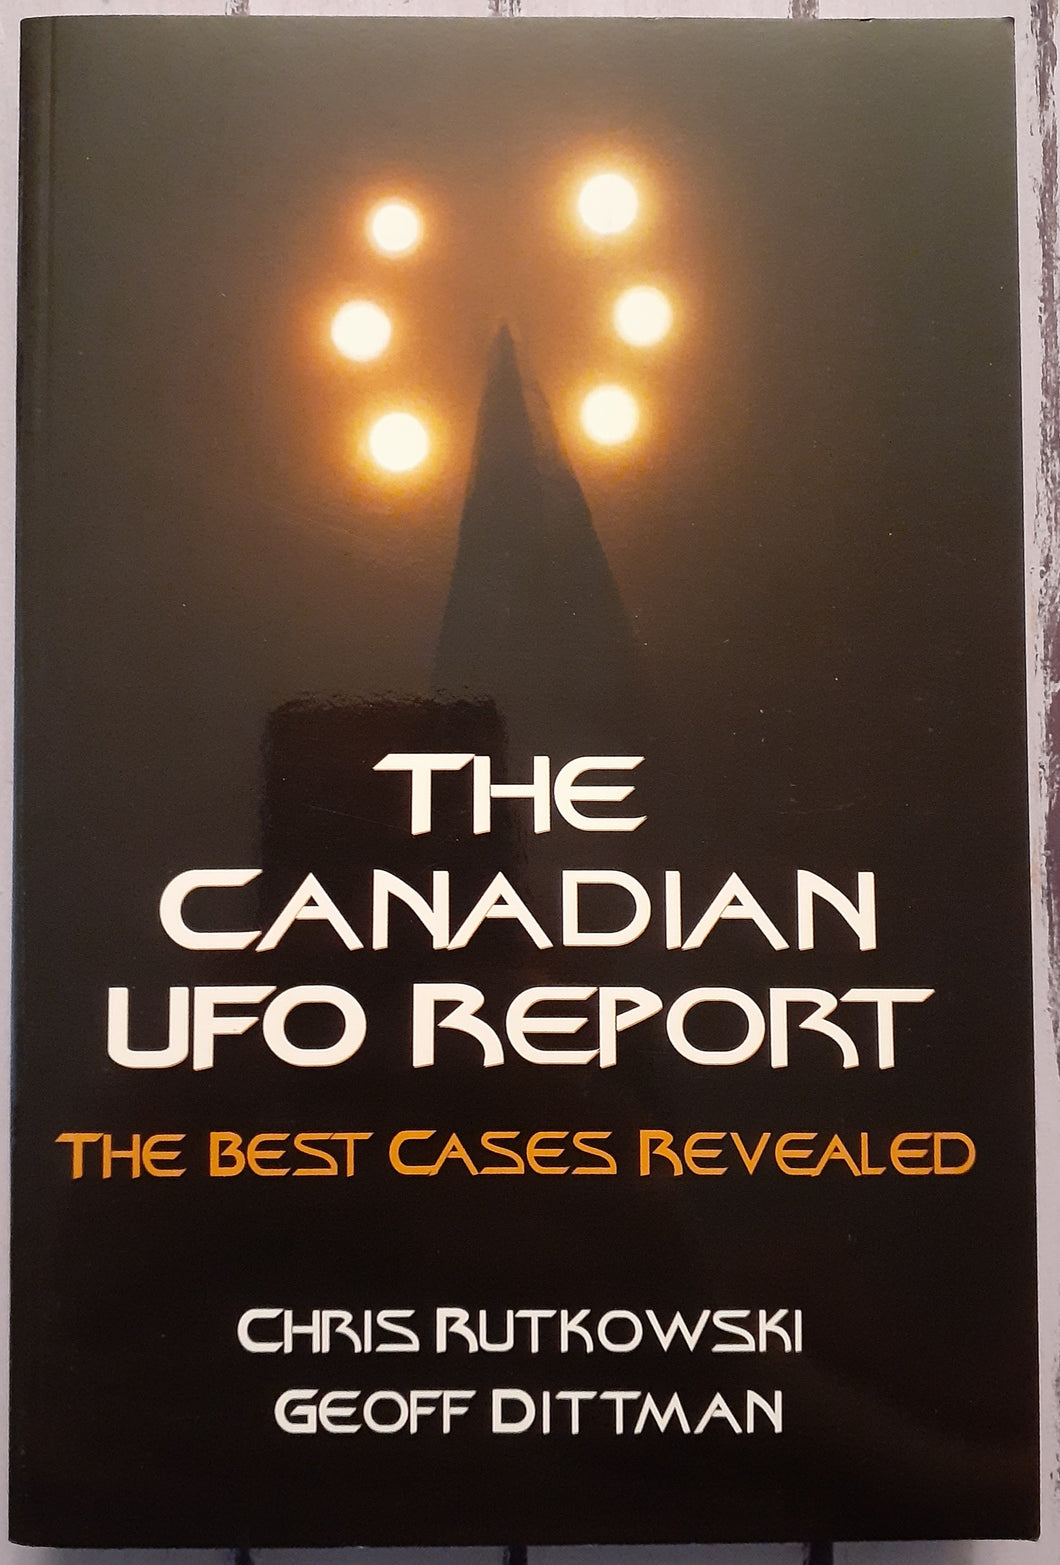 The Canadian UFO Report: The Best Cases Revealed